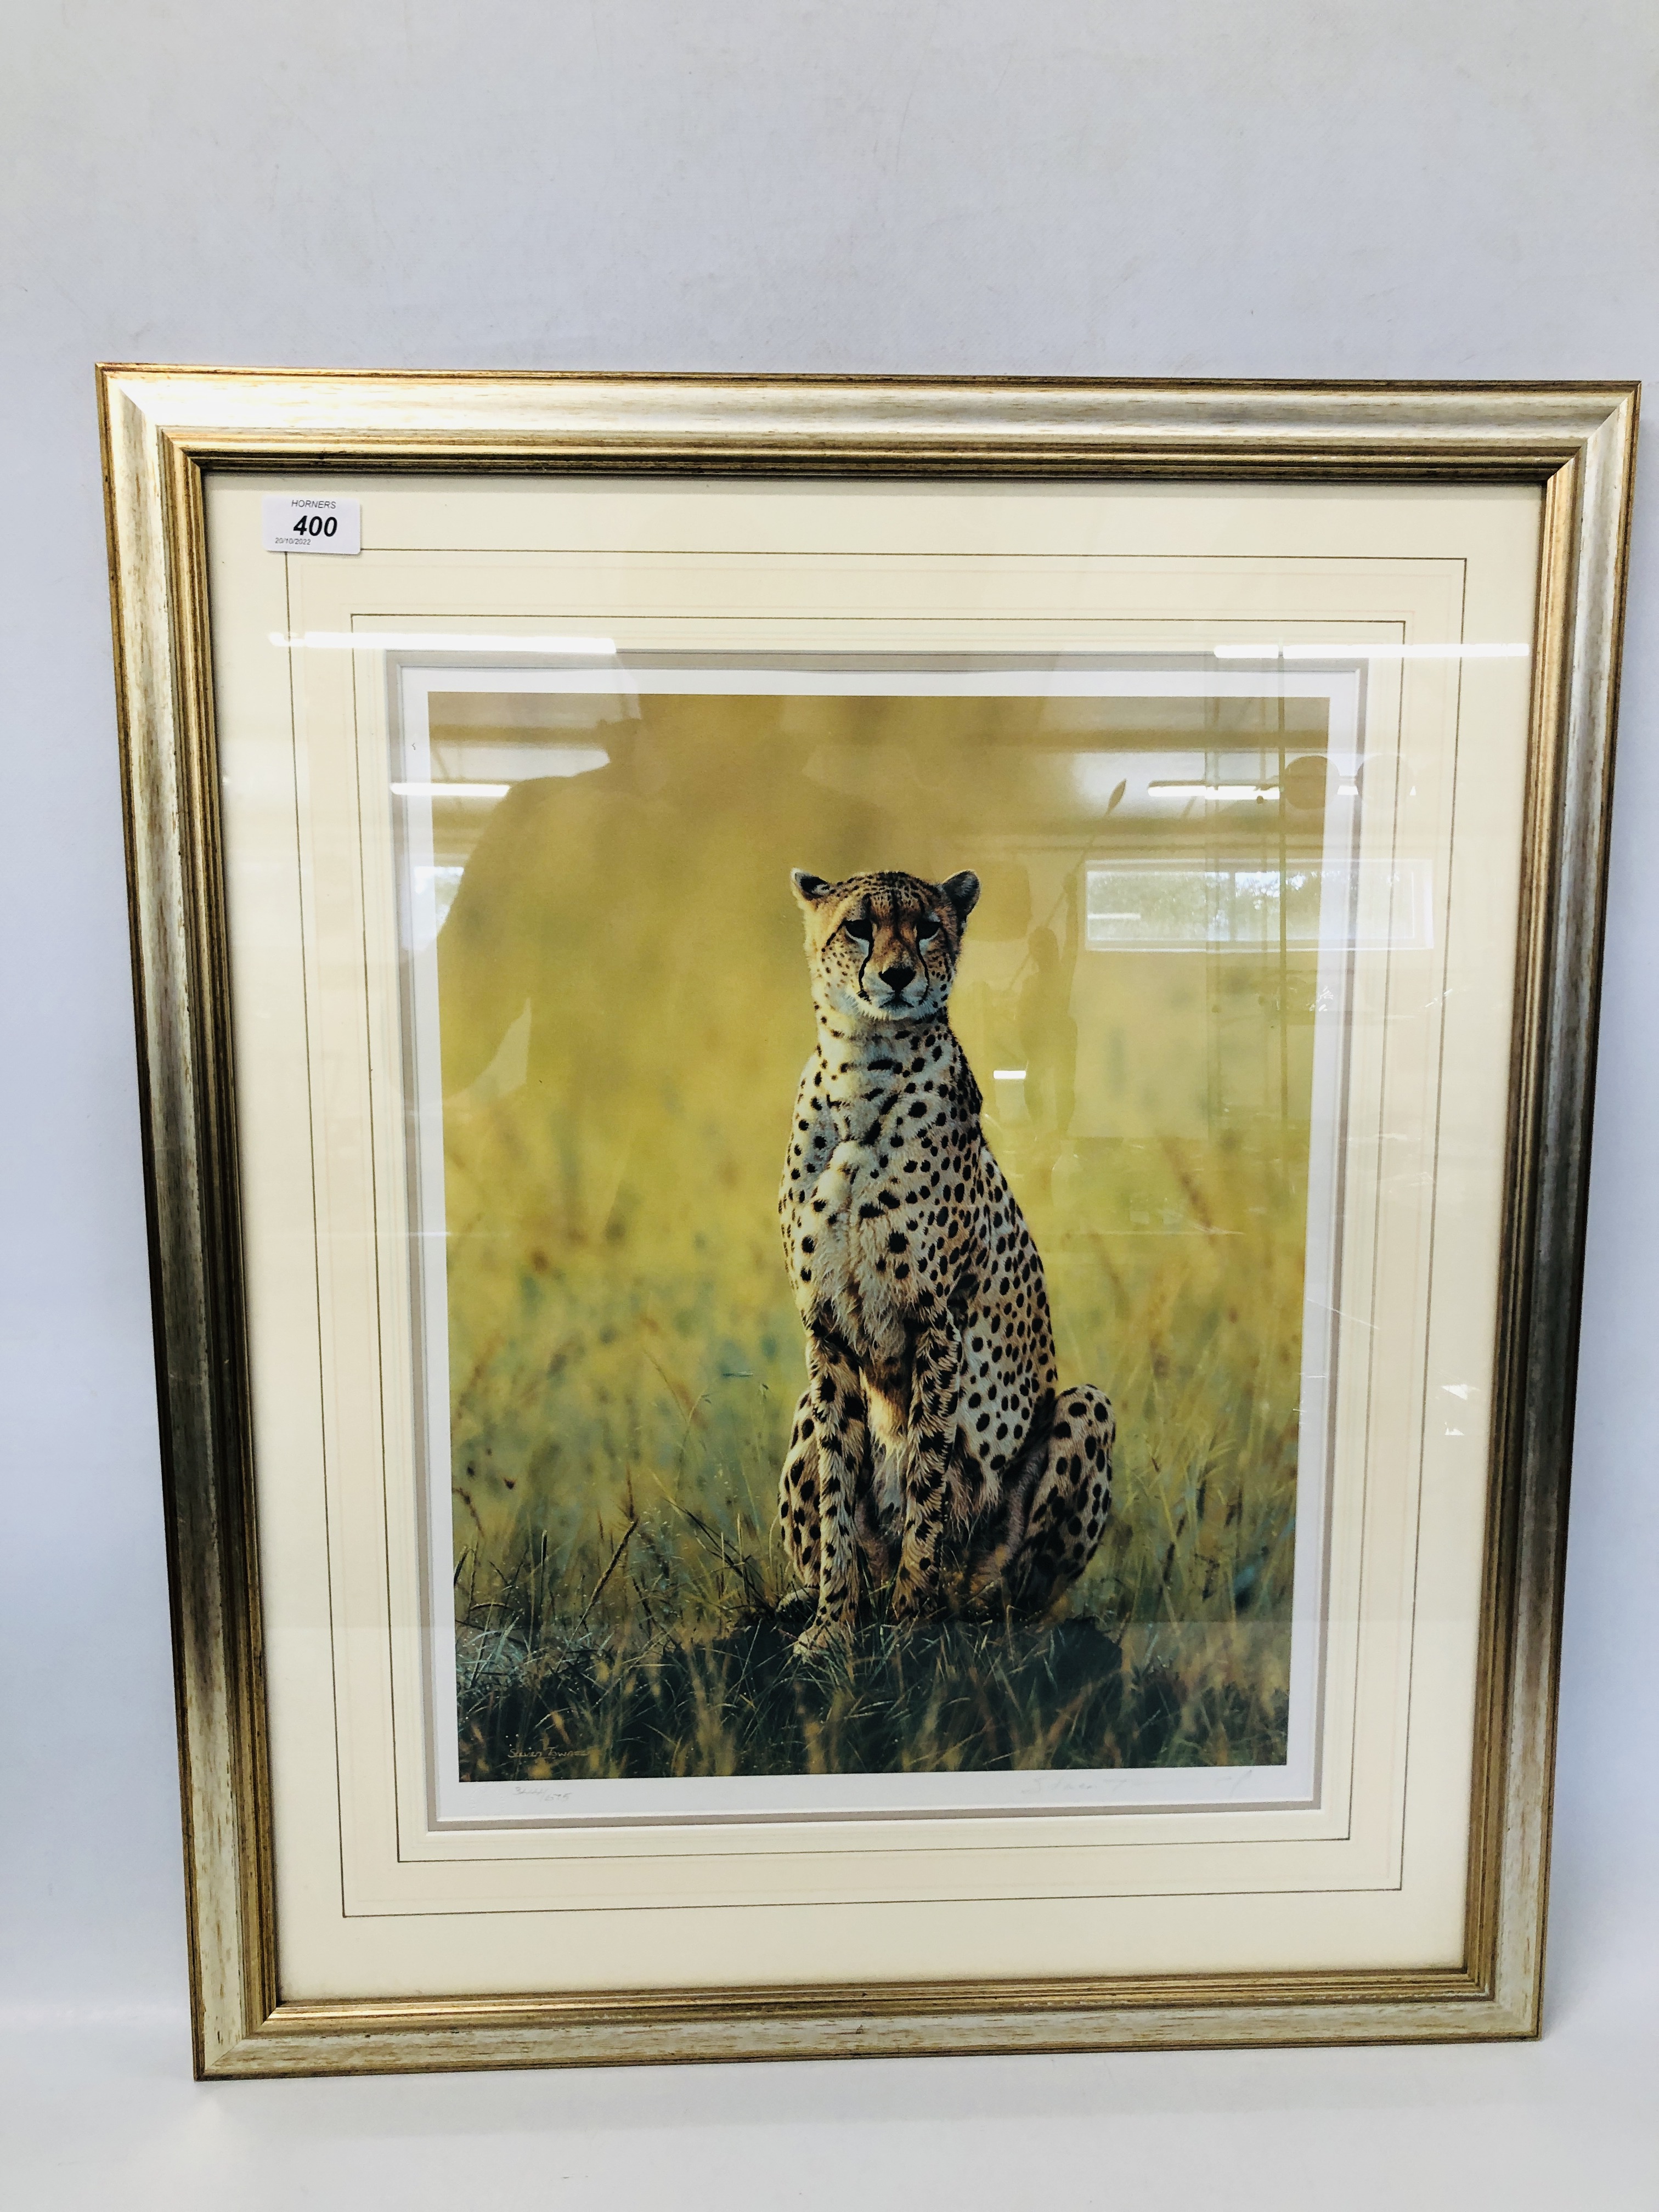 A LIMITED EDITION FRAMED PRINT OF A CHEETAH 344/675 SIGNED STEVEN TOWNSEND.